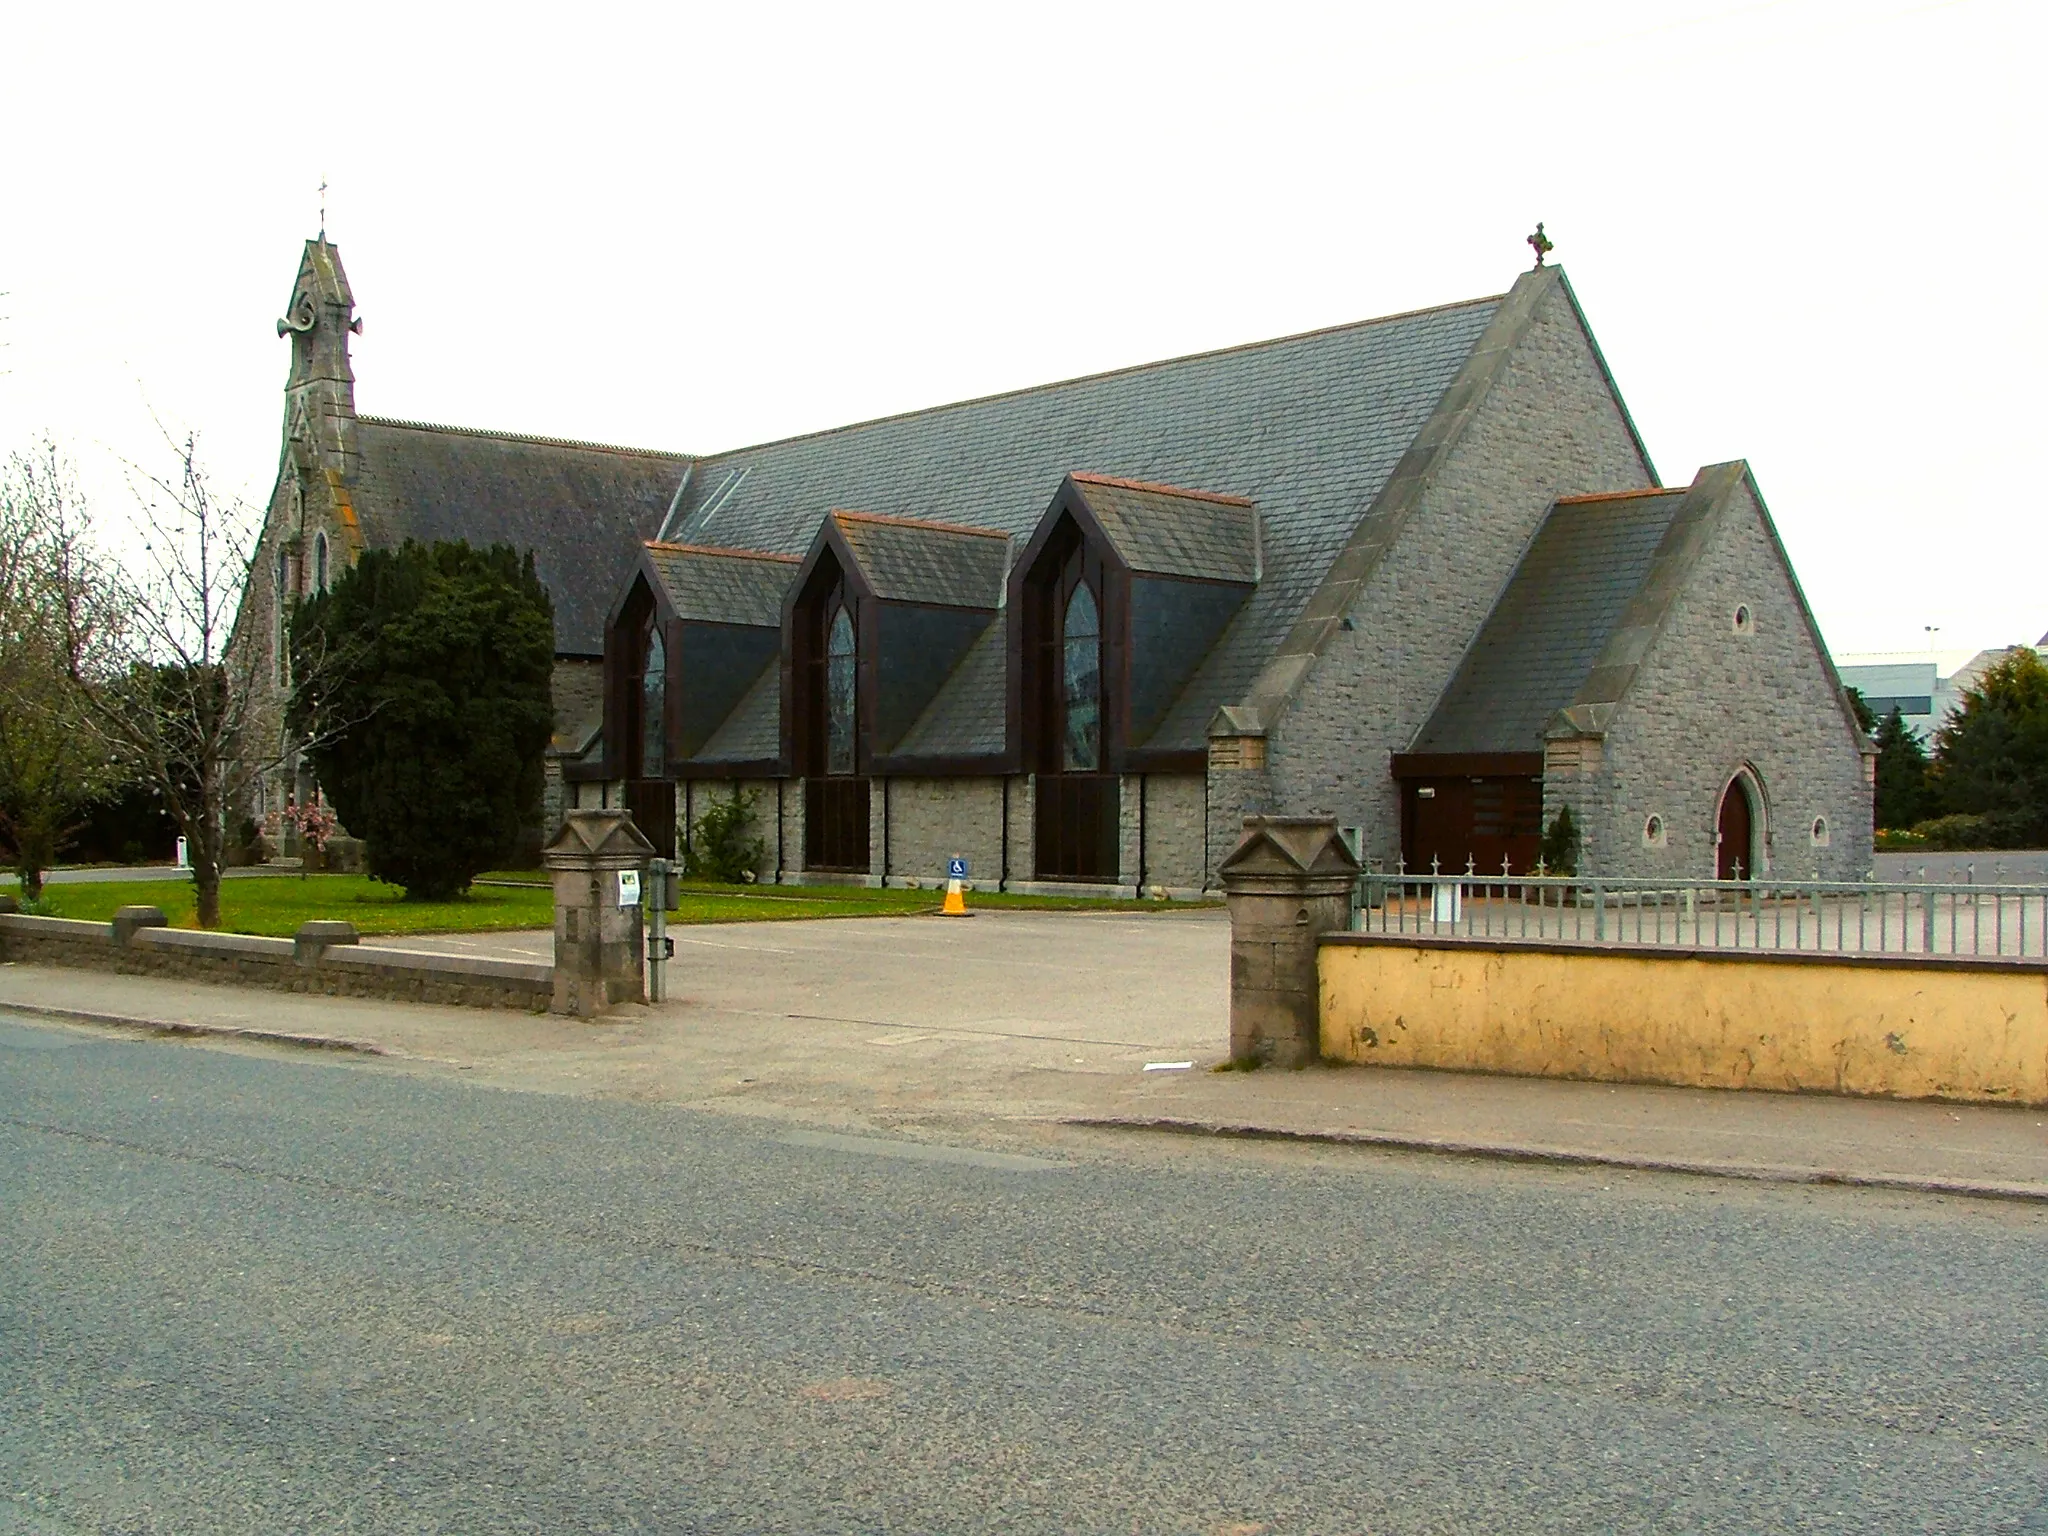 Photo showing: The image is incorrectly named (doh!), the church is actually the Church of the Immaculate Conception, Ashbourne, Co. Meath, Ireland.